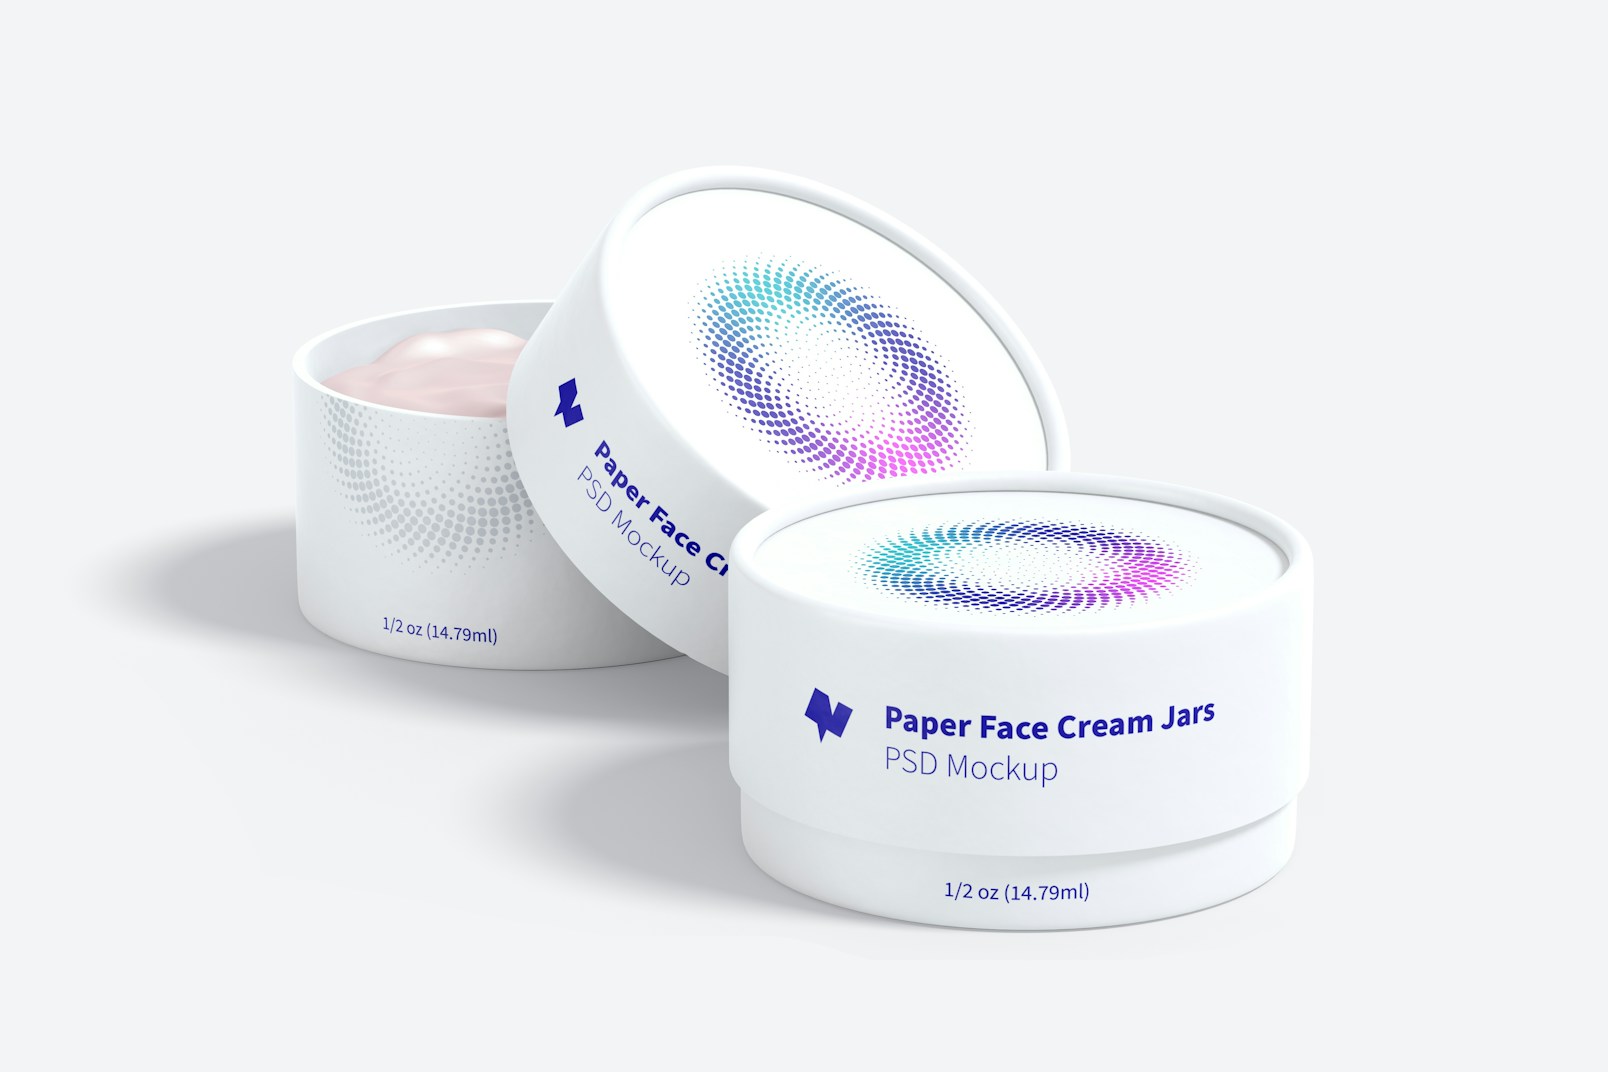 1/2 oz Paper Face Cream Jars Mockup, Opened and Closed